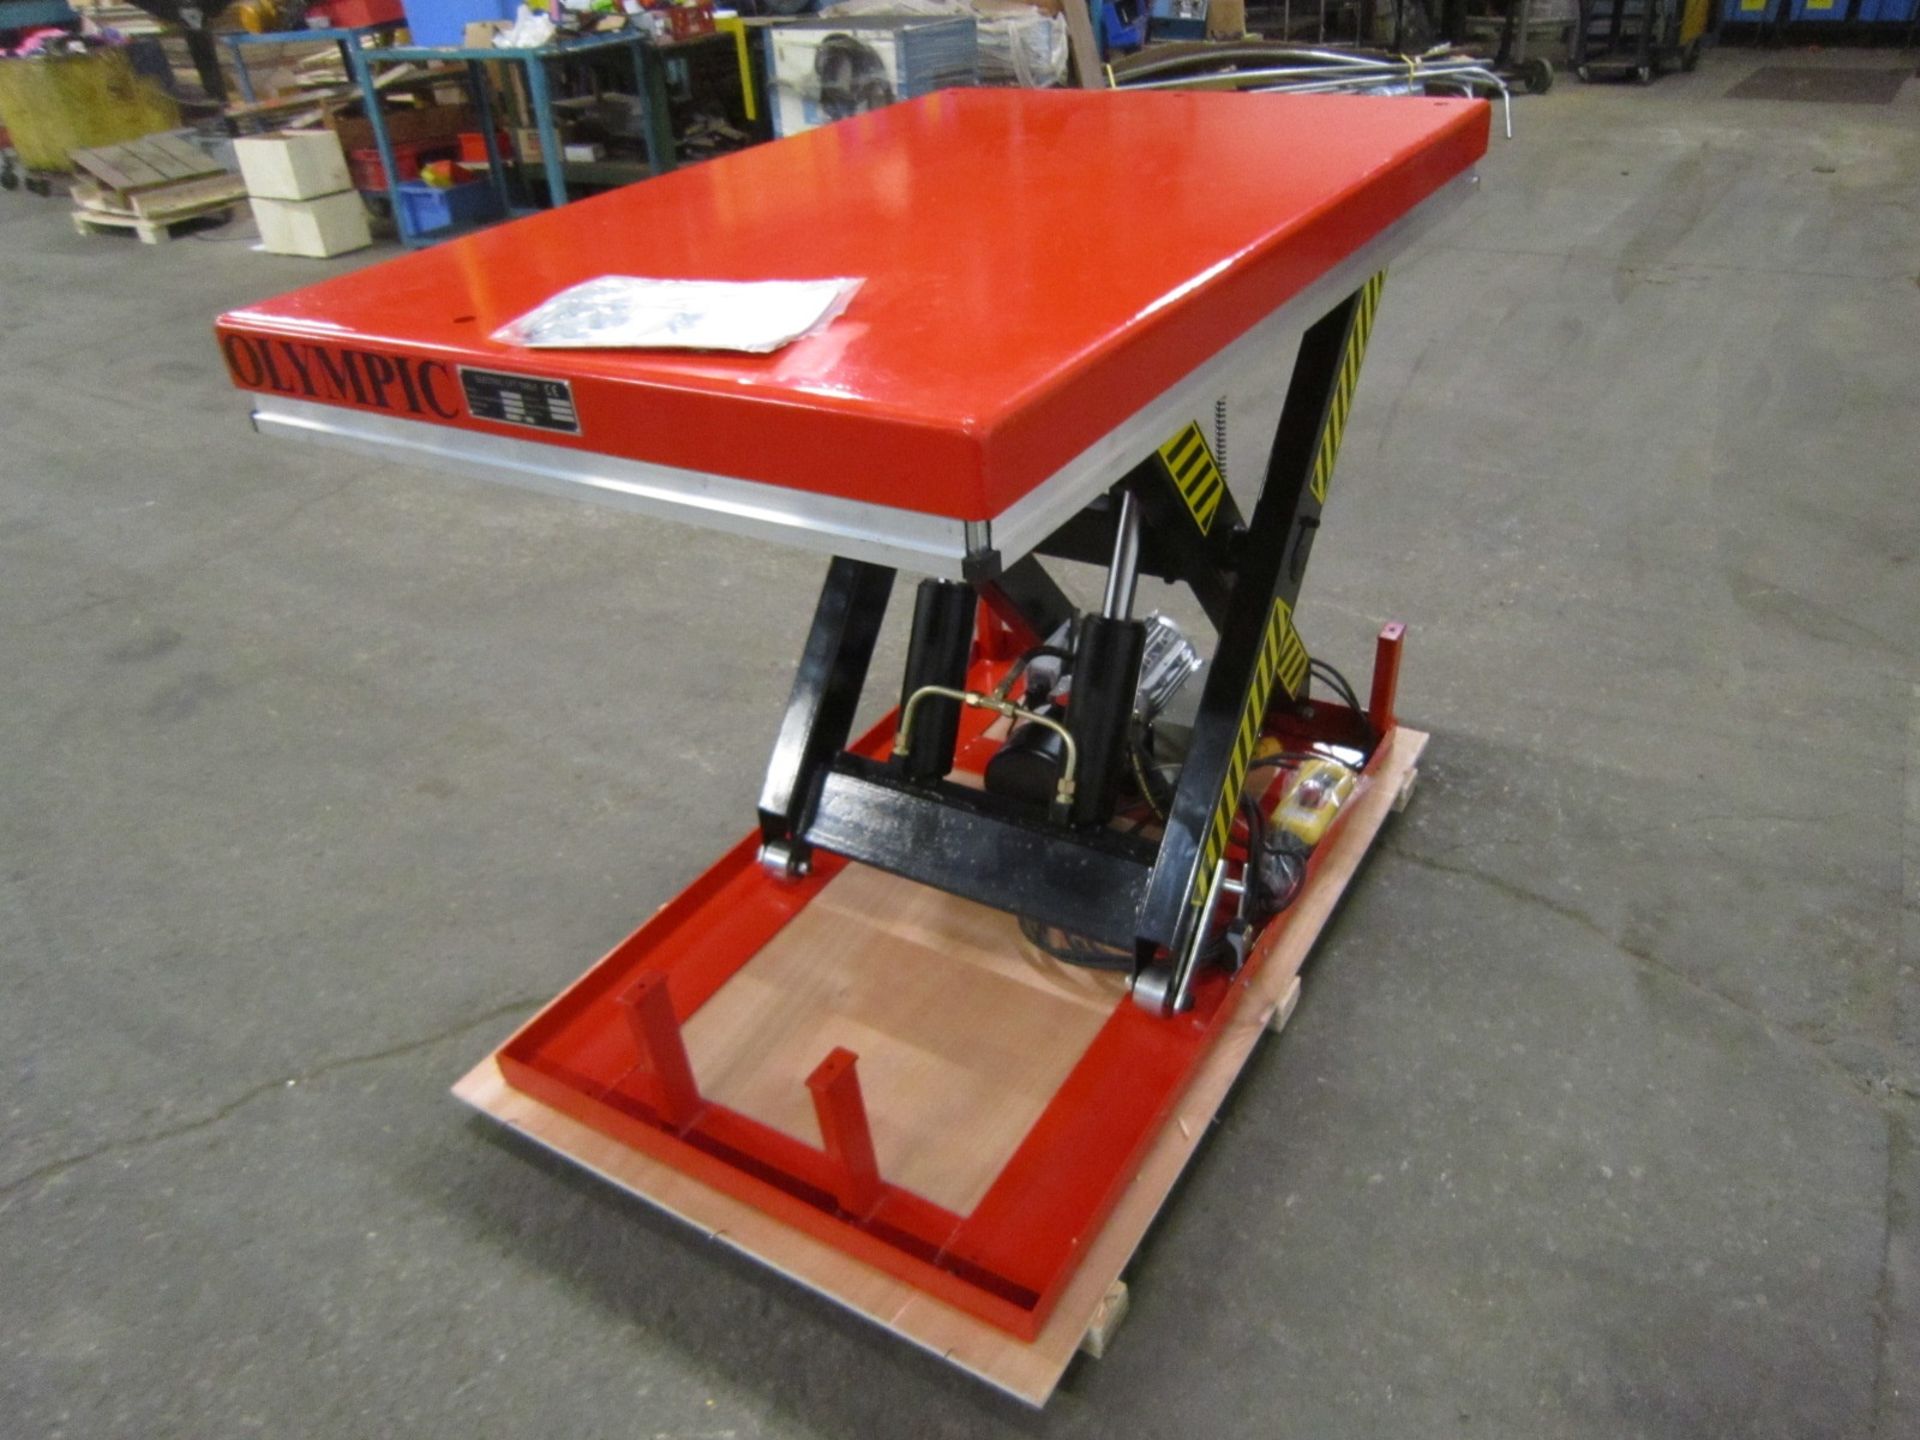 Olympic Hydraulic Lift Table 32" x 52" x 40" lift - 4000lbs capacity - UNUSED and MINT - 115V